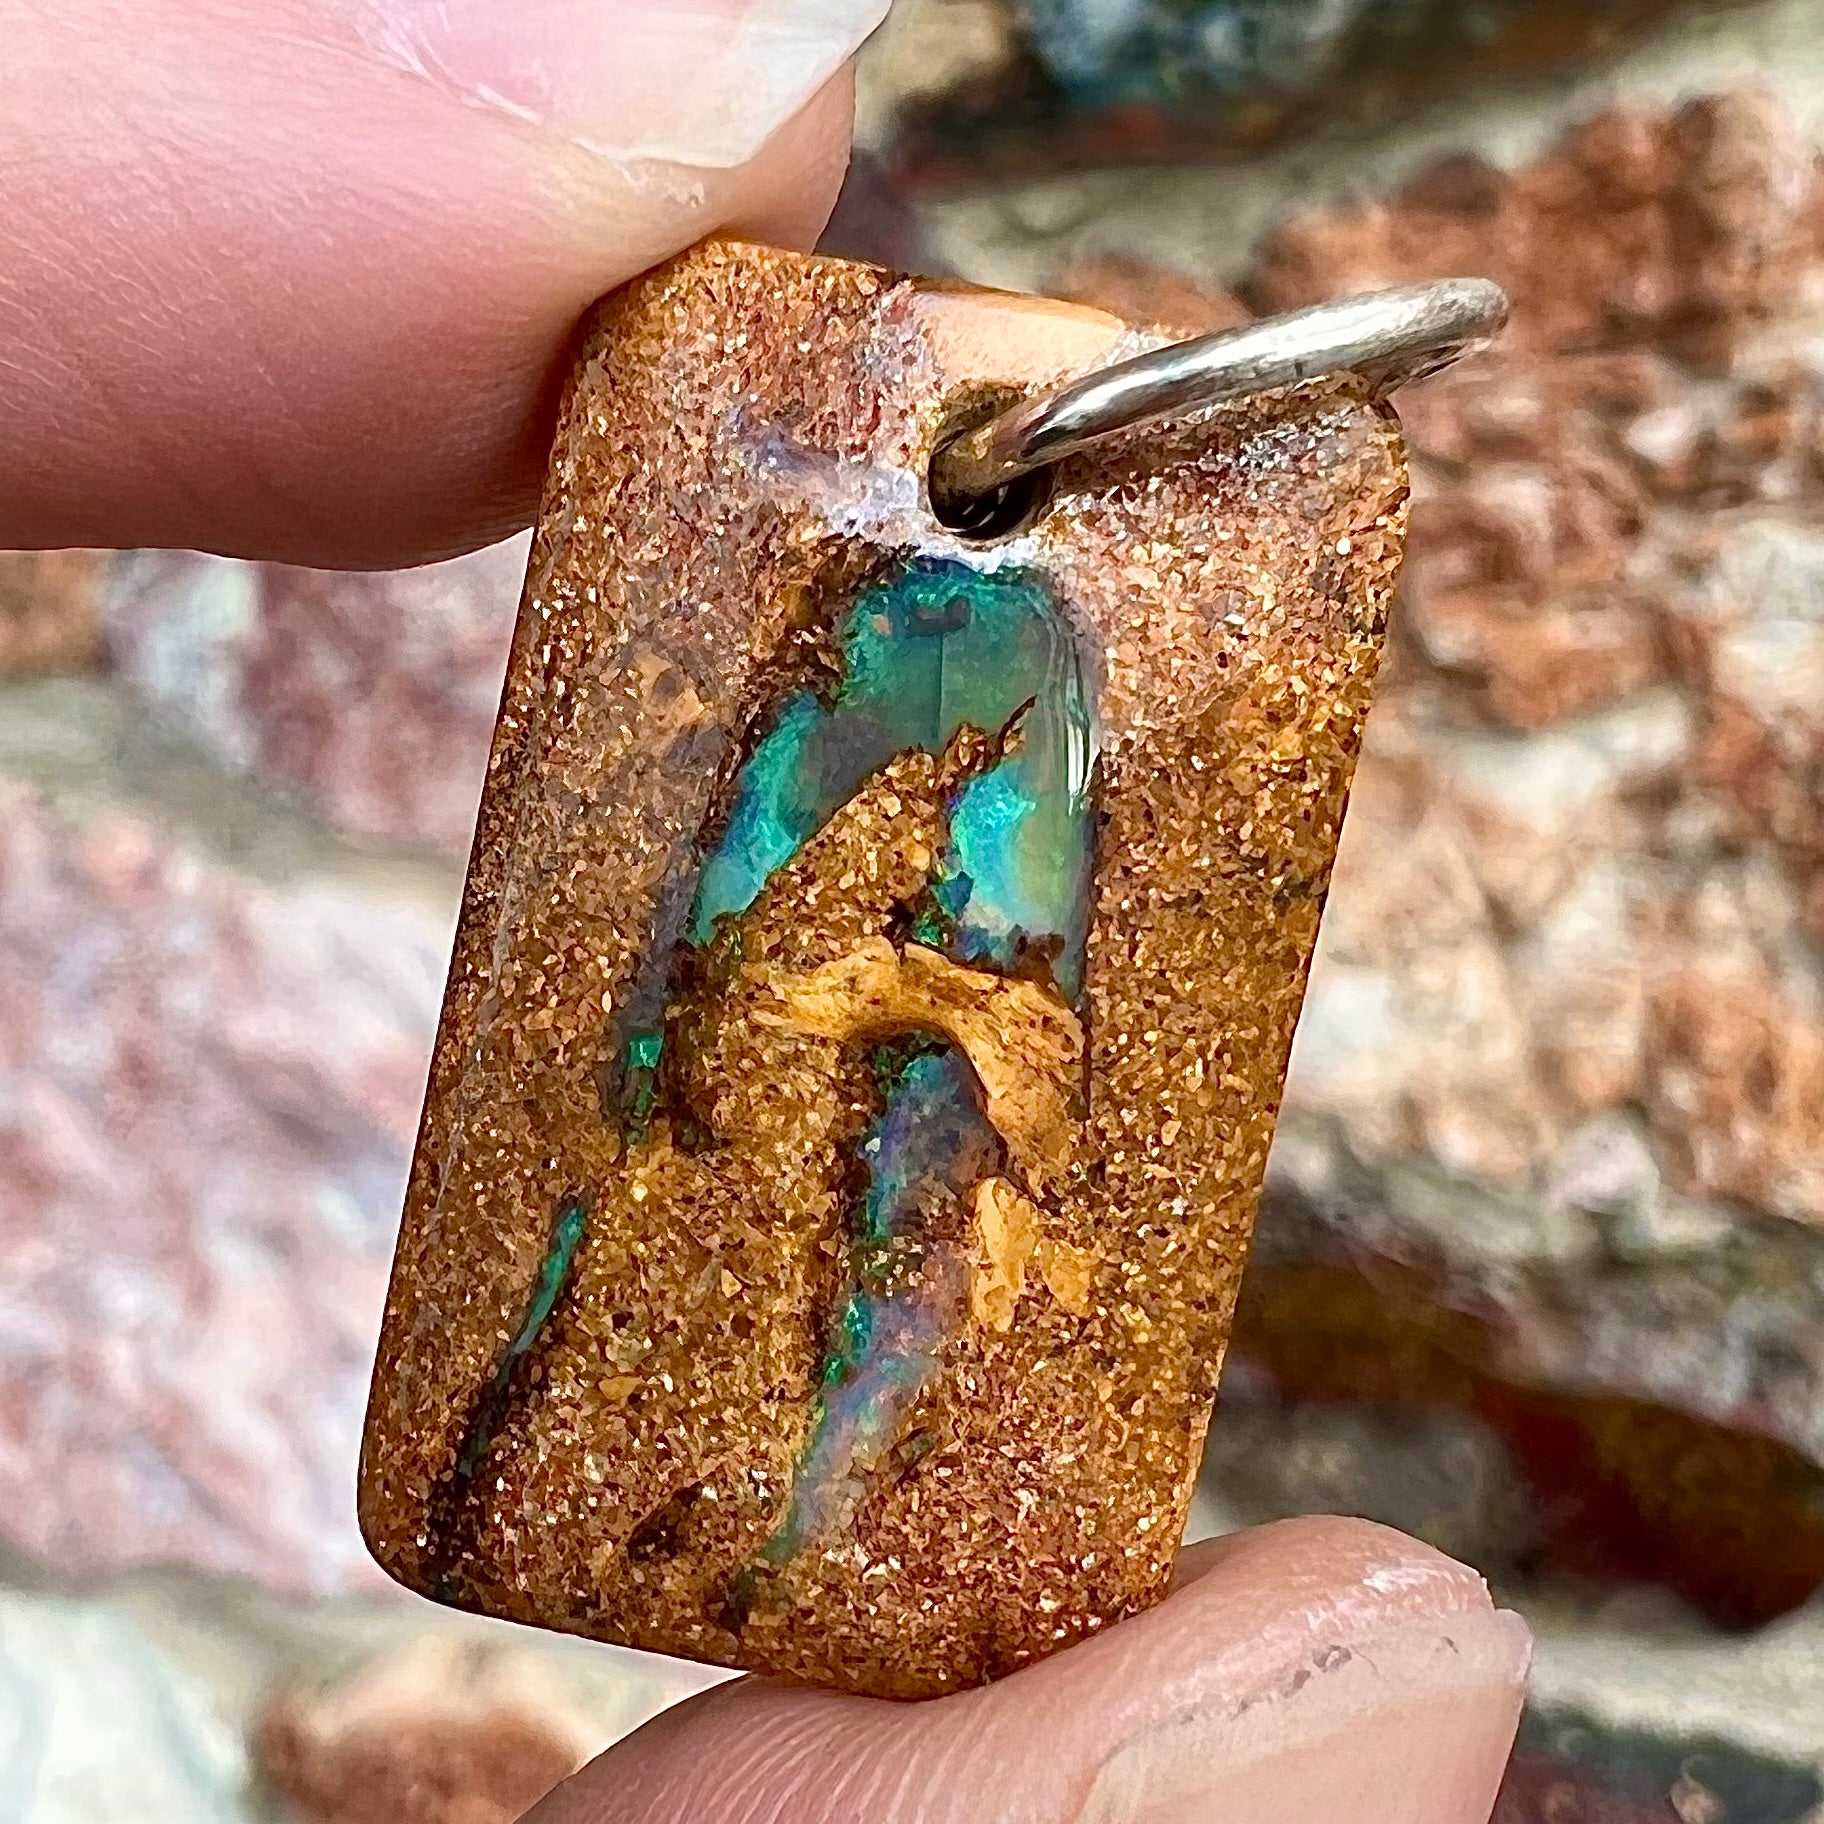 A drilled boulder opal stone with a sterling silver ring through the hole to be worn as a pendant.  The pattern resembles a hamsa hand.